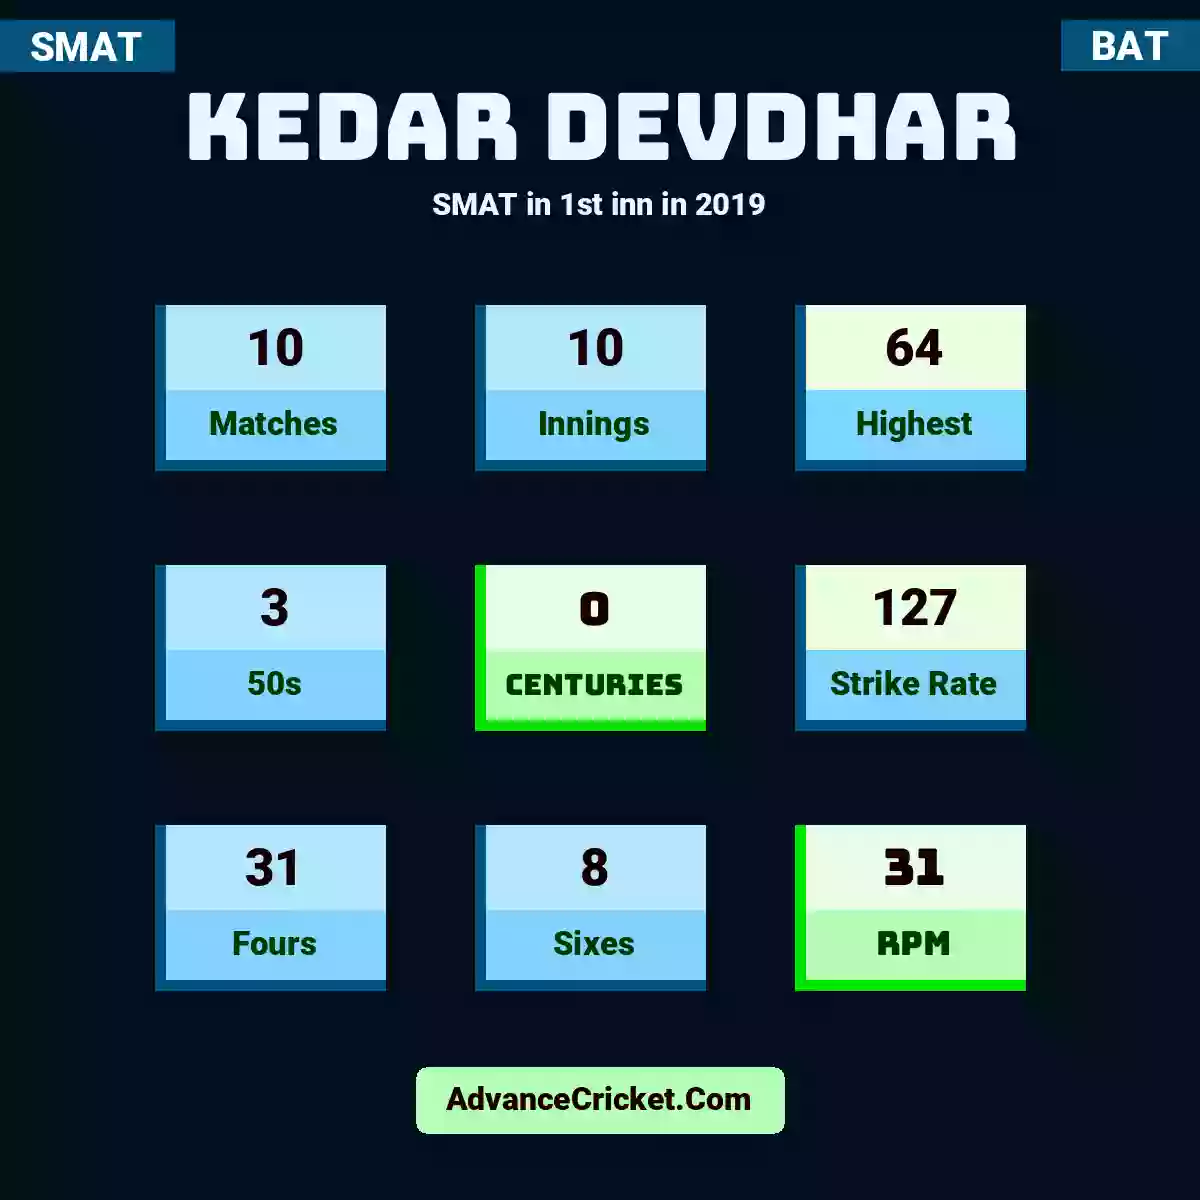 Kedar Devdhar SMAT  in 1st inn in 2019, Kedar Devdhar played 10 matches, scored 64 runs as highest, 3 half-centuries, and 0 centuries, with a strike rate of 127. K.Devdhar hit 31 fours and 8 sixes, with an RPM of 31.